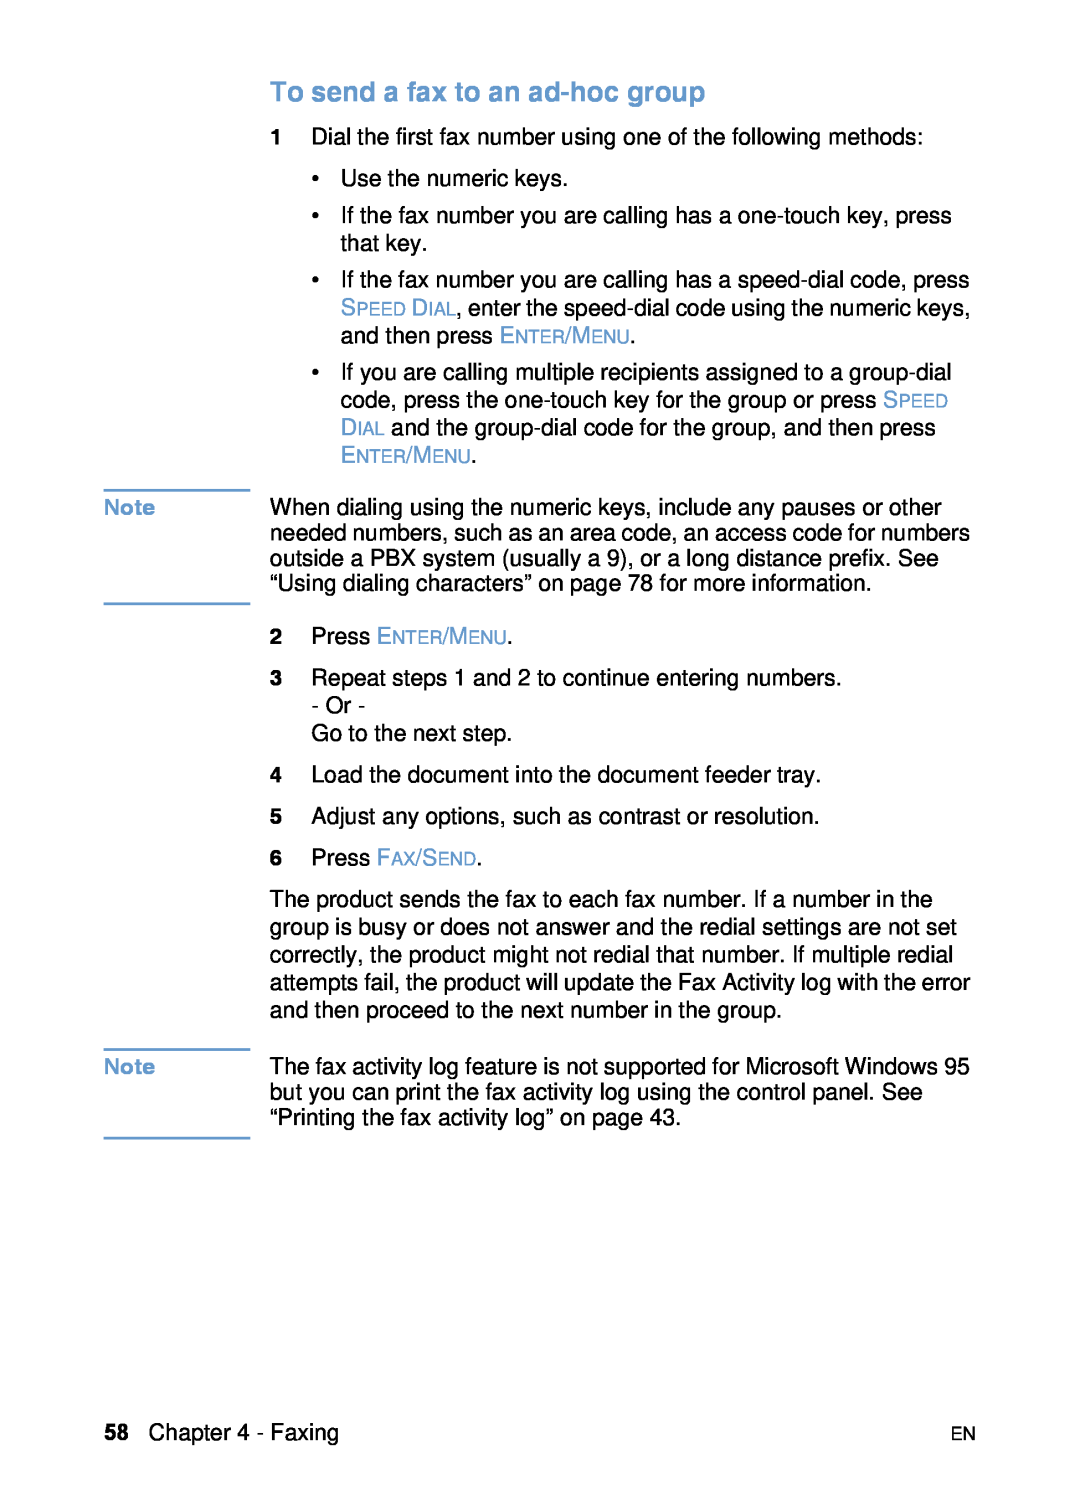 HP 3200 manual To send a fax to an ad-hoc group 